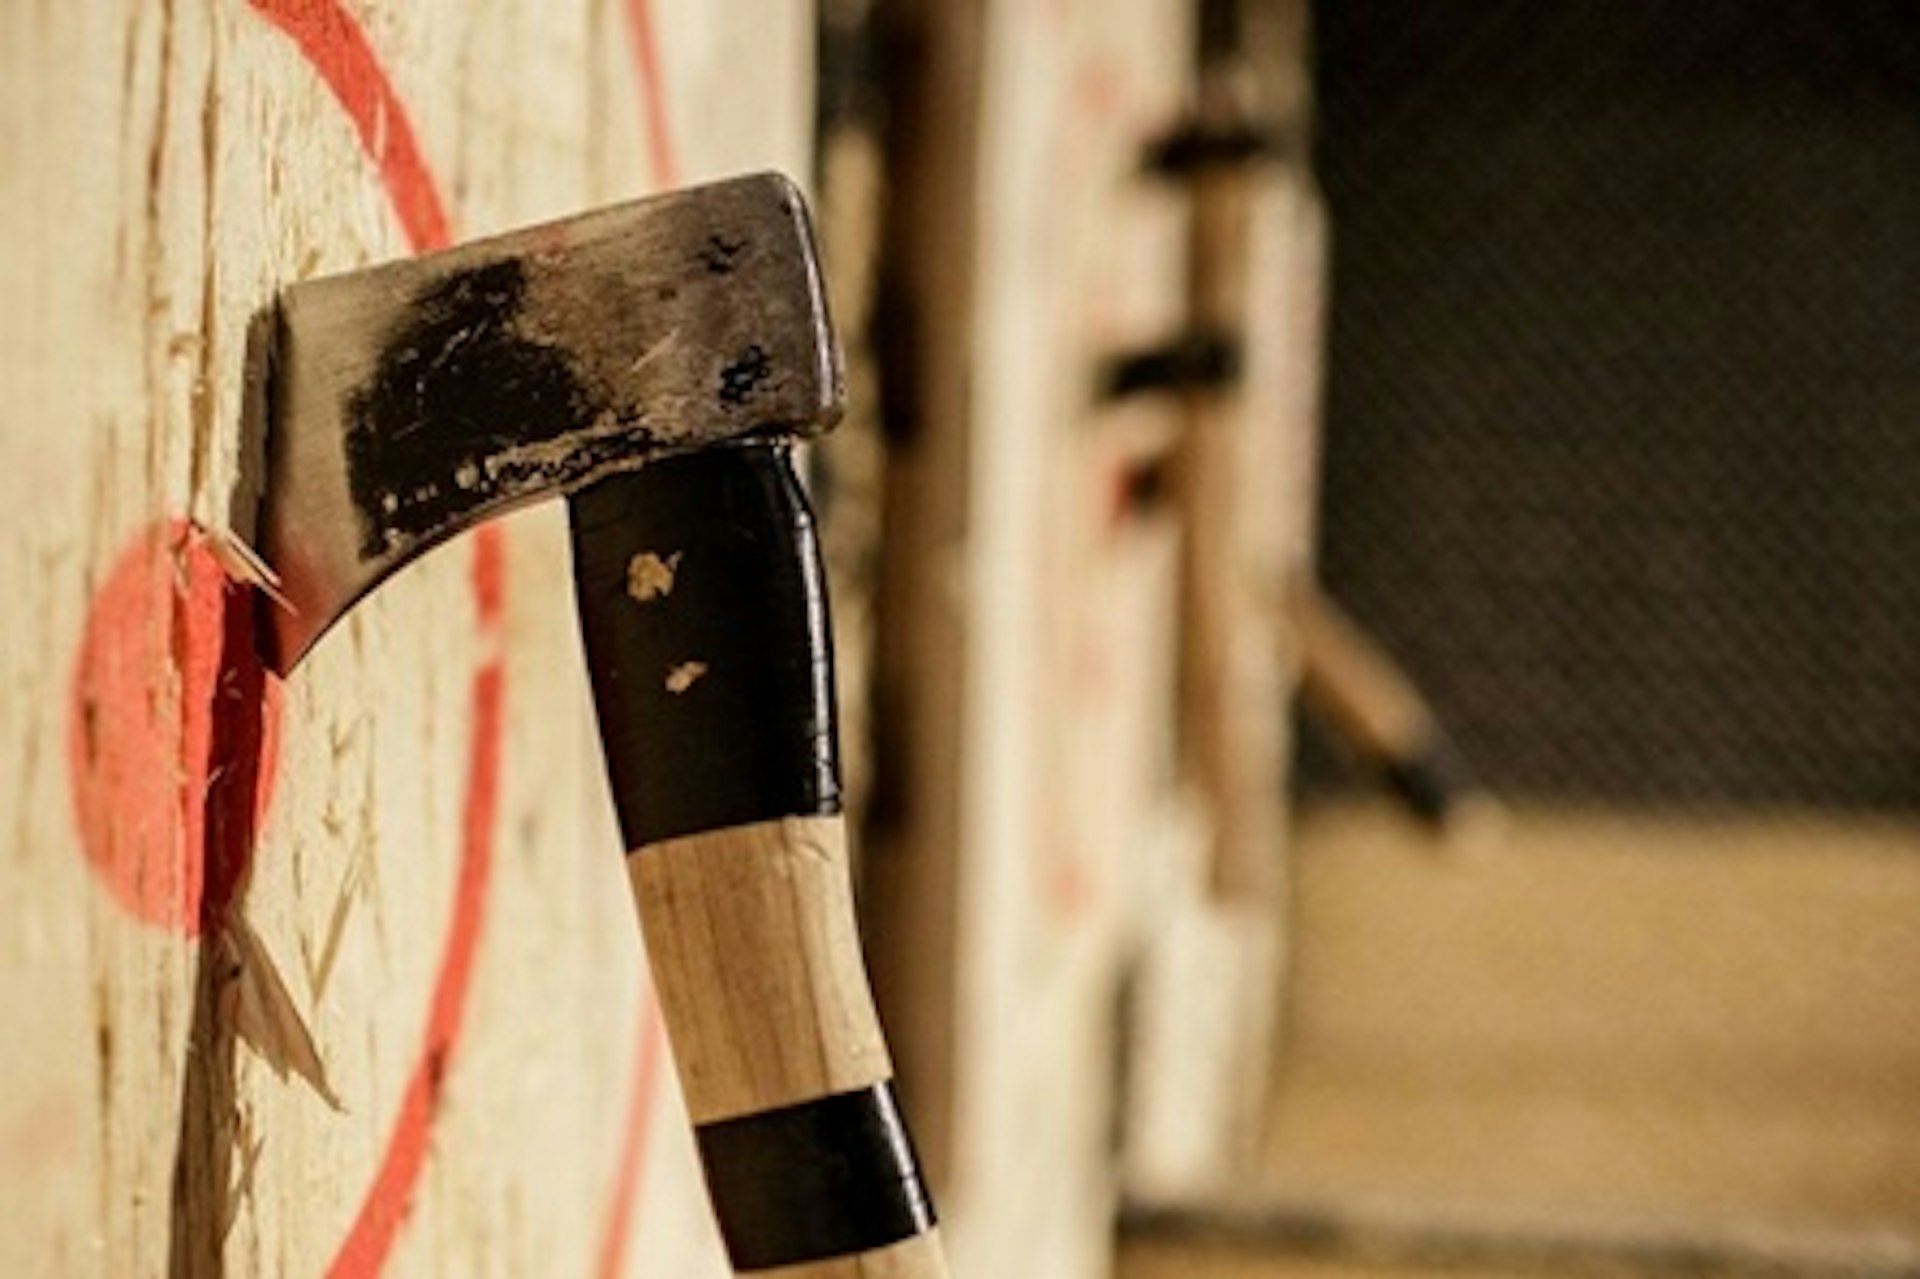 Urban Axe Throwing for Two at Whistle Punks, London 2